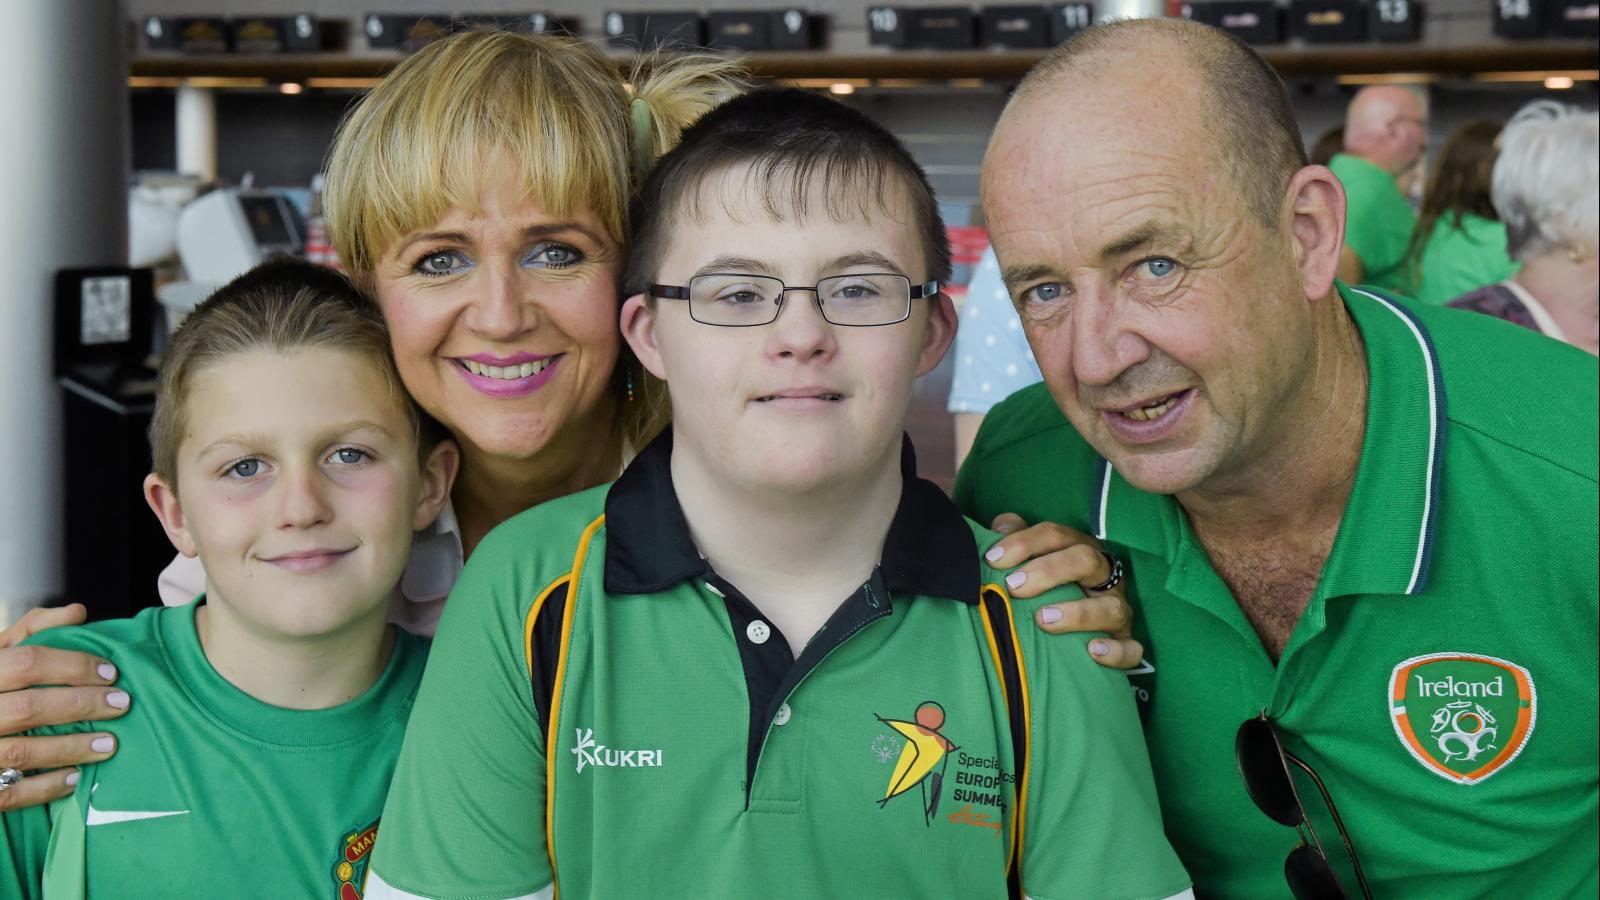 Smiling Family - Special Olympics athlete pictured with his Mum and Dad and younger brother